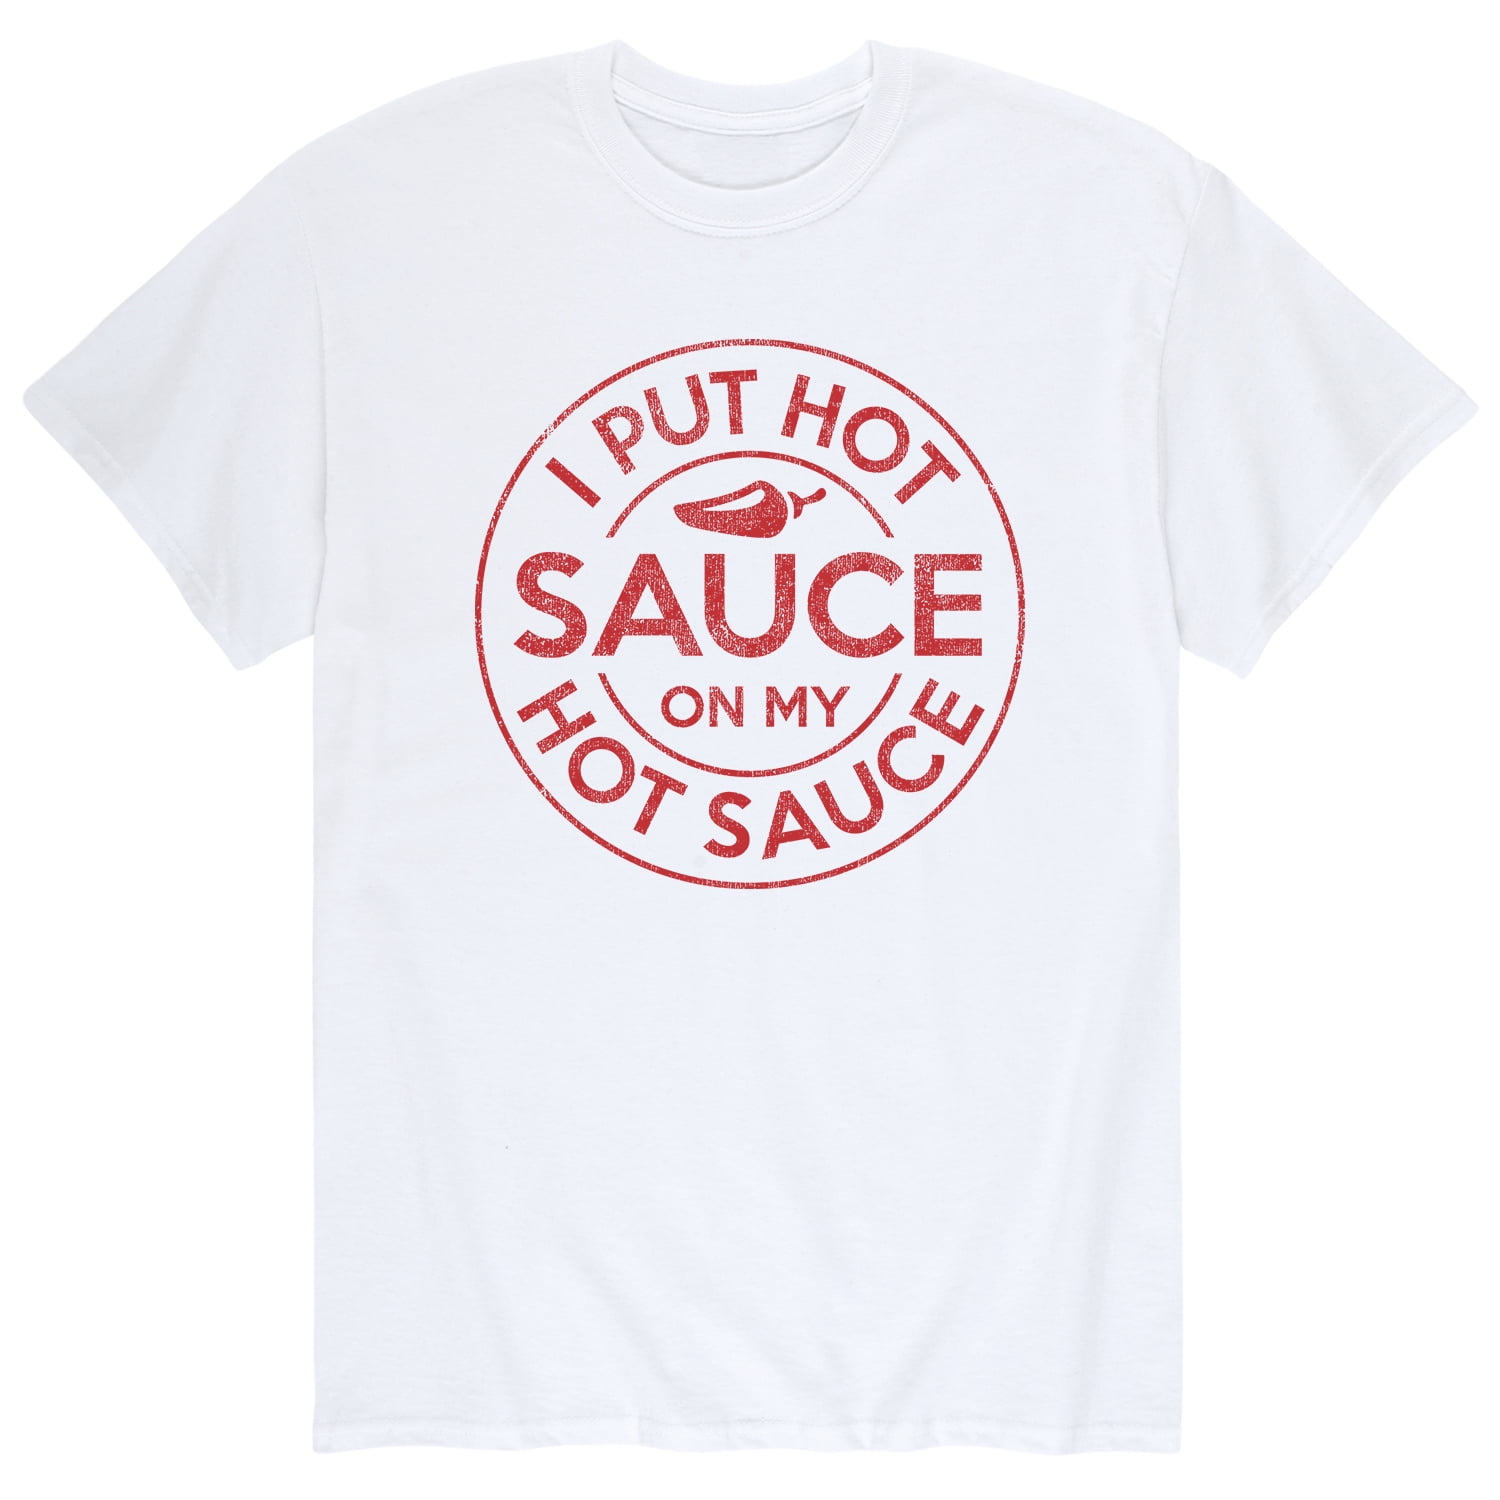 Instant Message - I Put Hot Sauce On My Hot Sauce - Adult Short Sleeve Tee ...